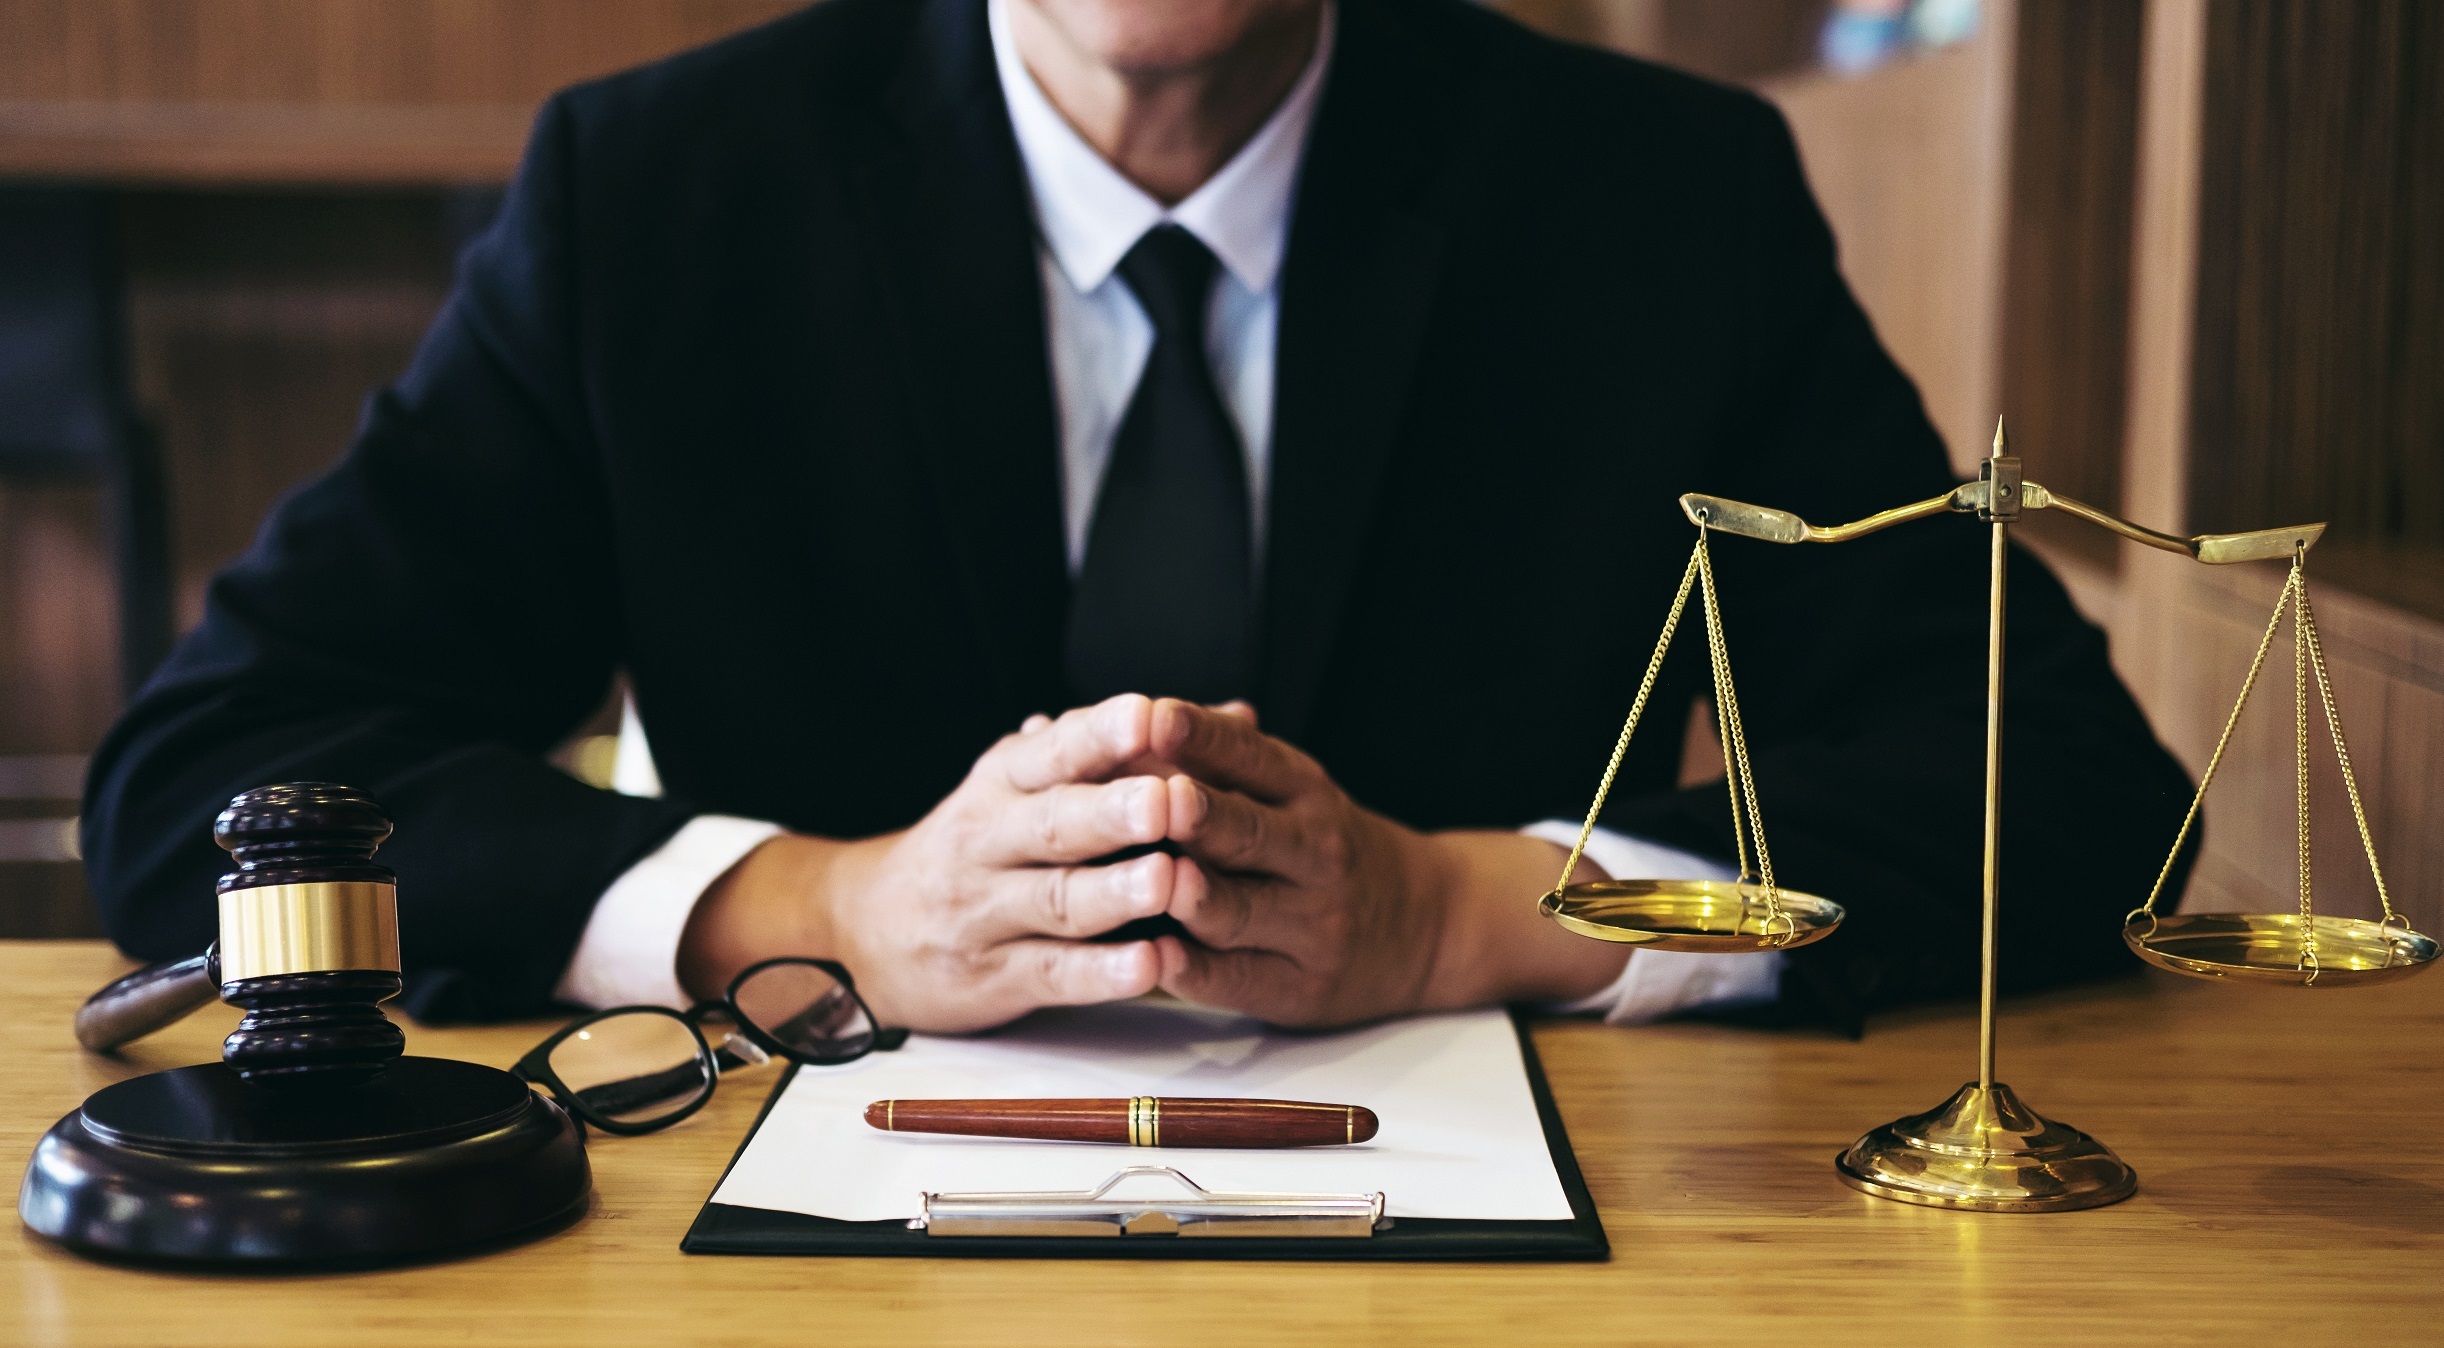 LOOKING TO HIRE THE SERVICES OF A BRAIN INJURY ATTORNEY? HERE’S WHAT YOU SHOULD KNOW